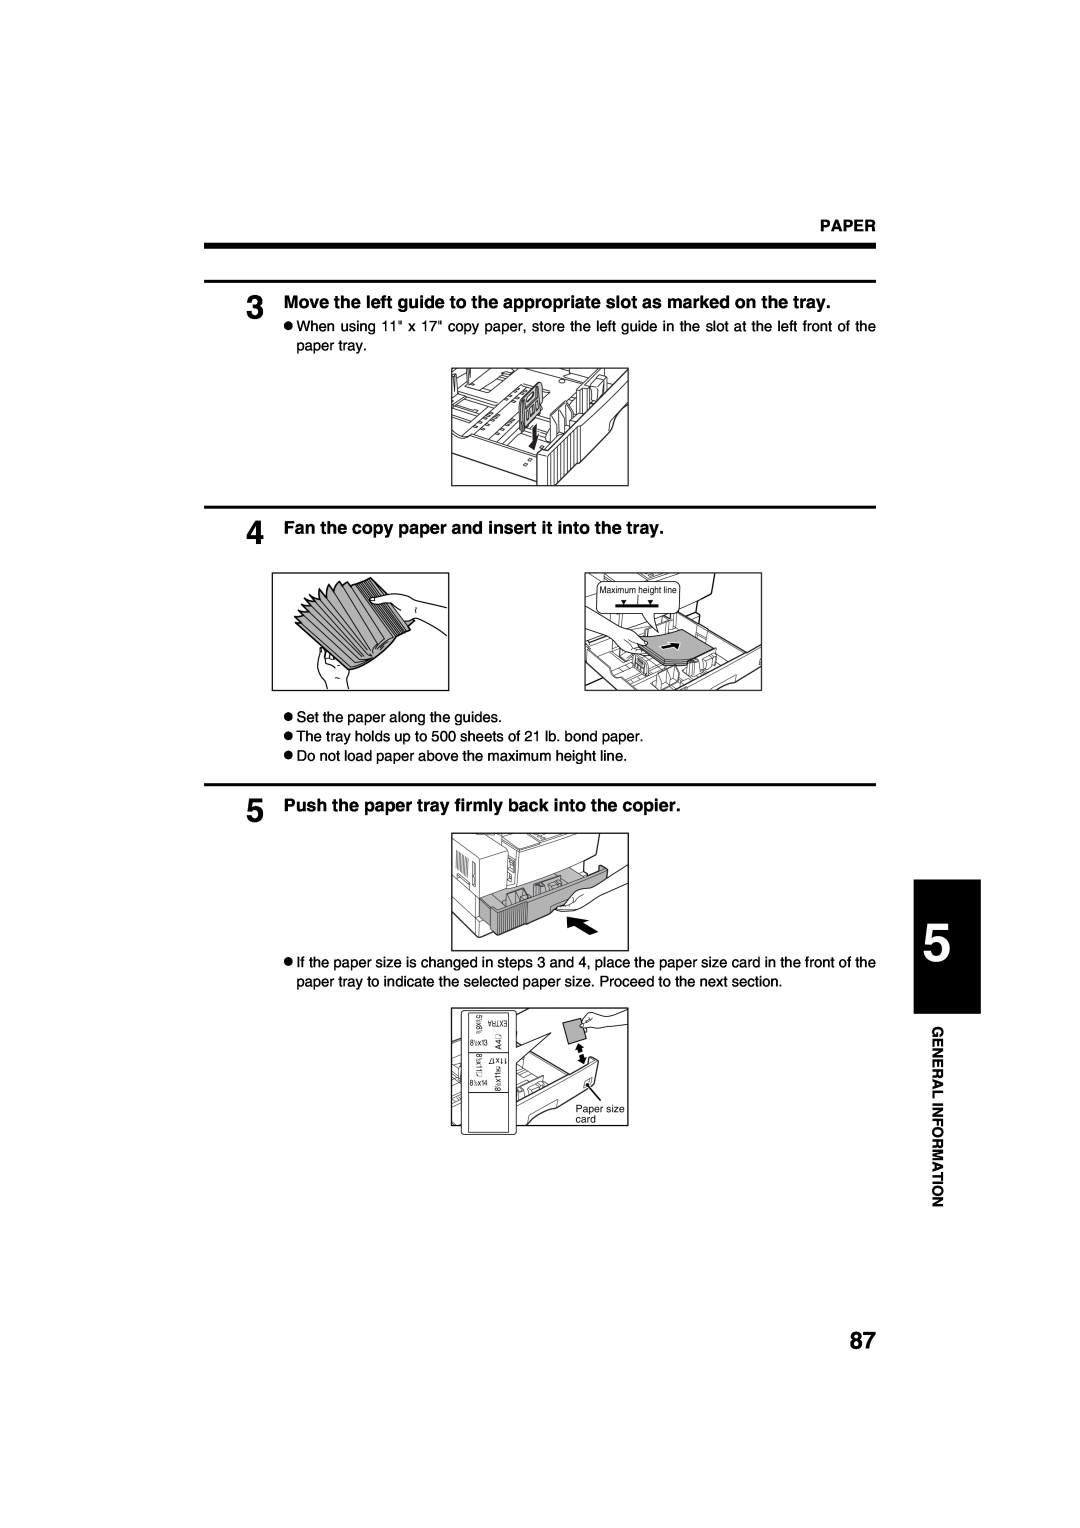 Sharp AR-M208 operation manual Move the left guide to the appropriate slot as marked on the tray, Paper 